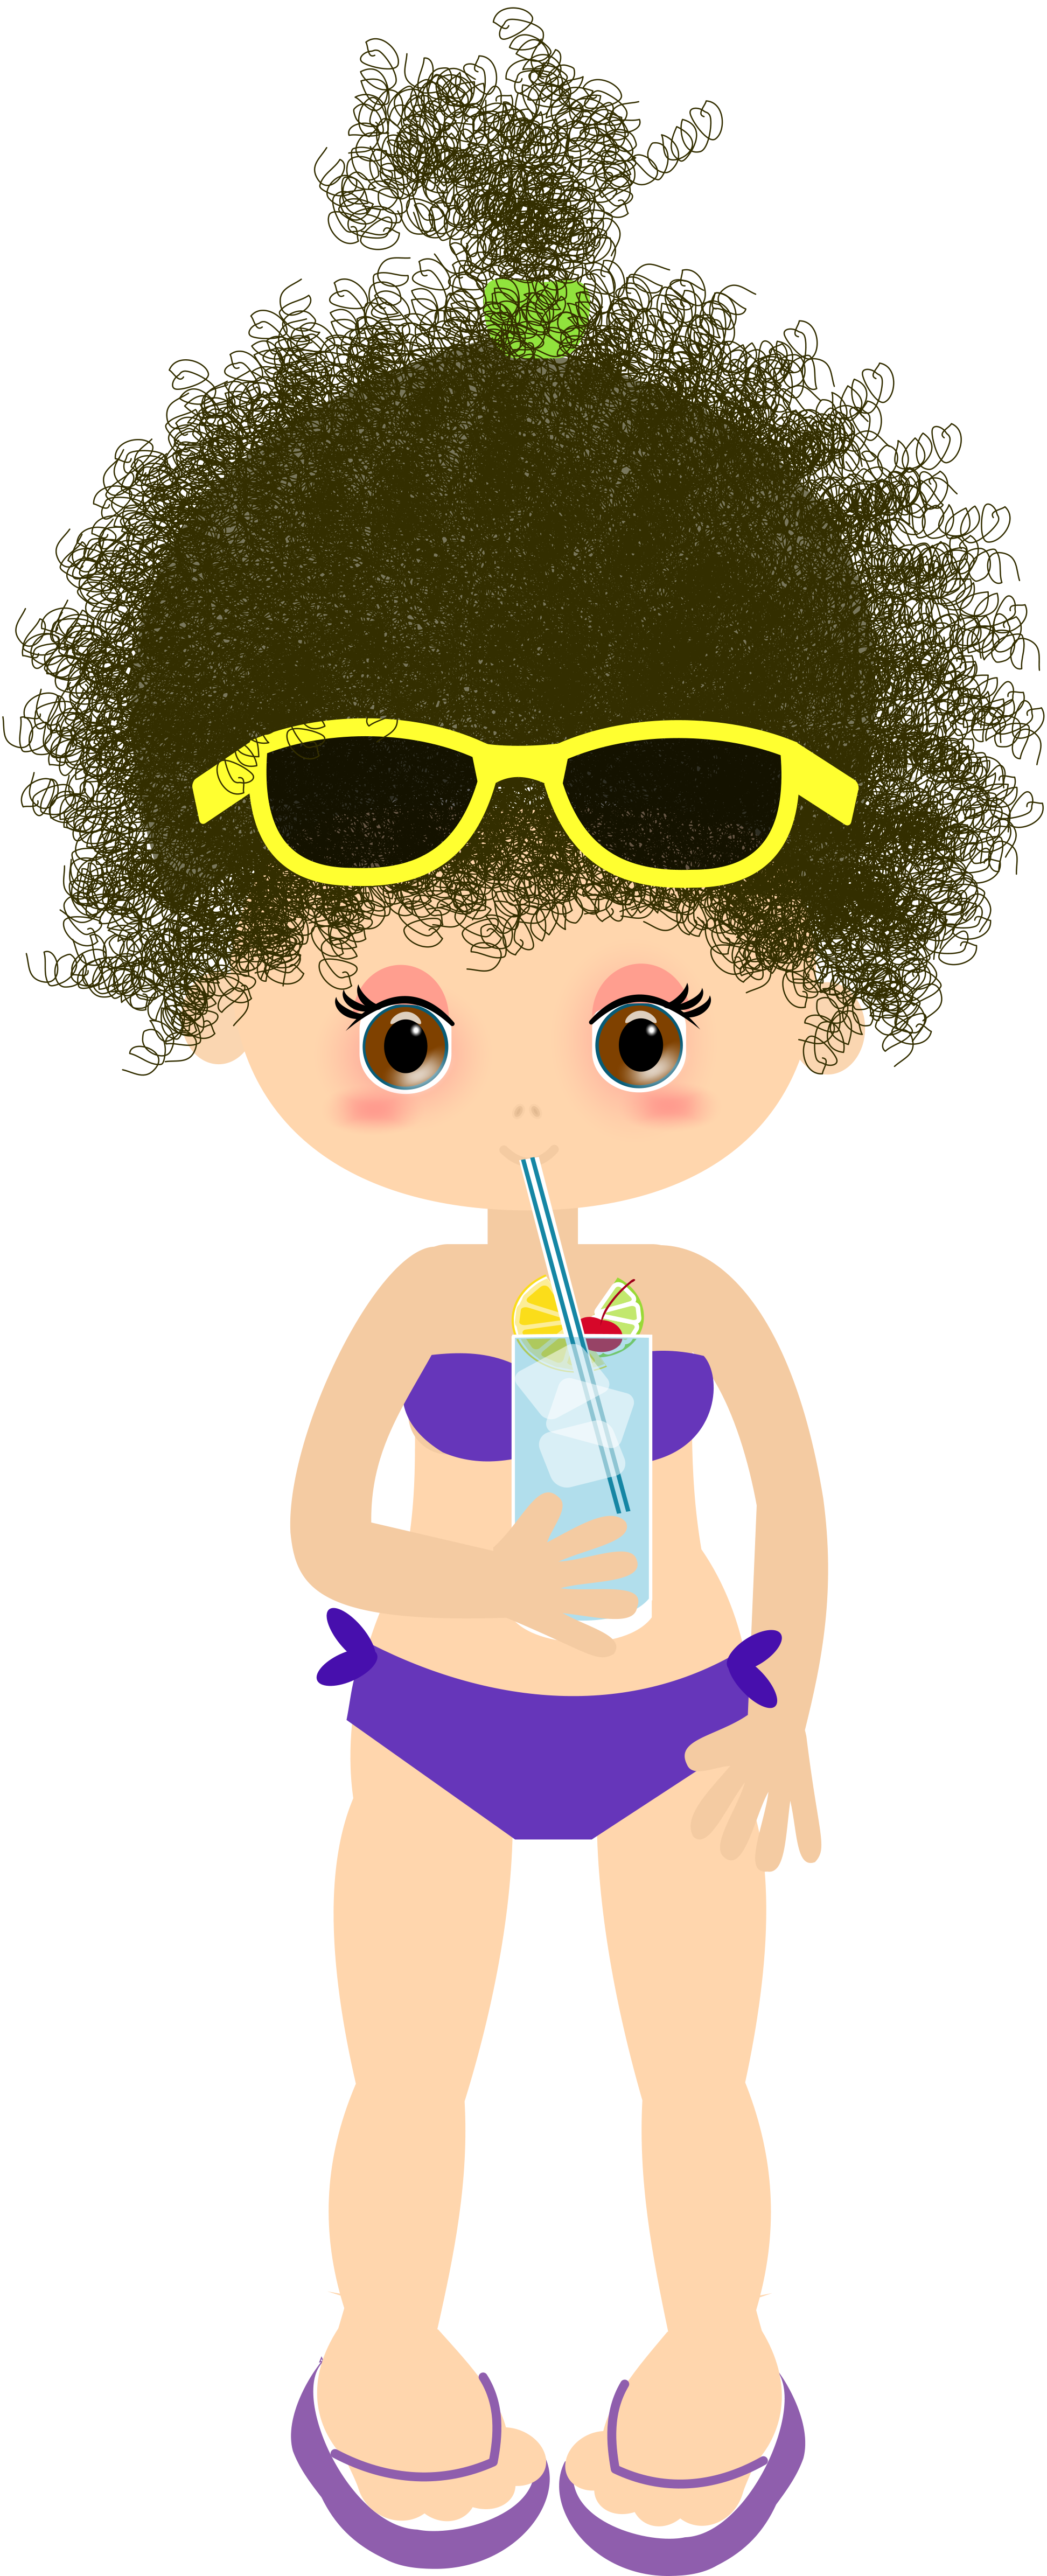 goggles clipart pool party